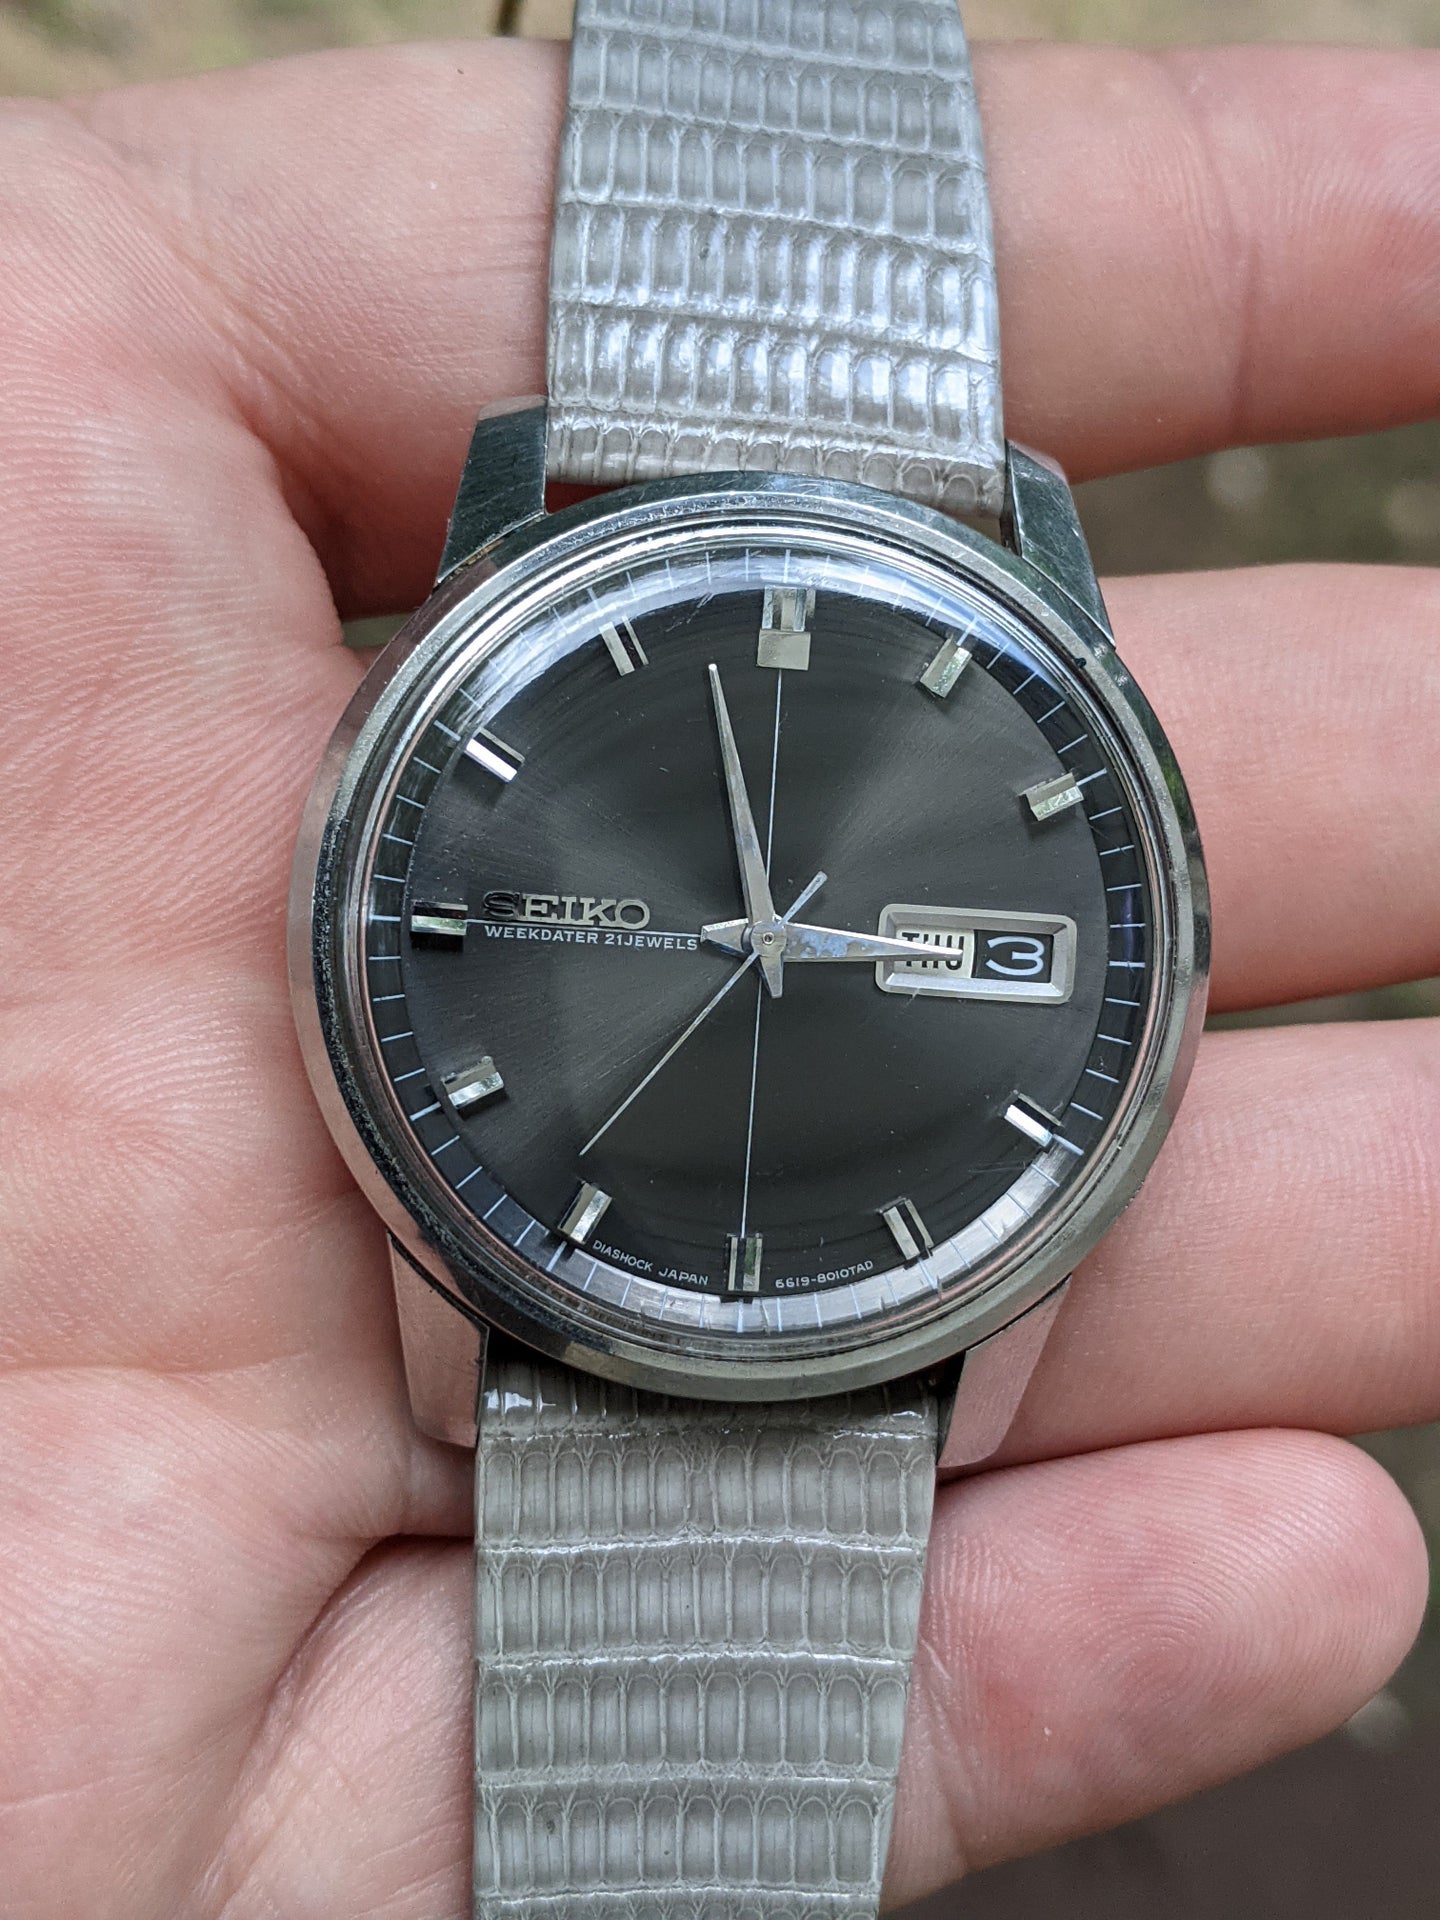 For Sale - 1965 Seiko 6619-8010 Weekdater - $150 | The Watch Site